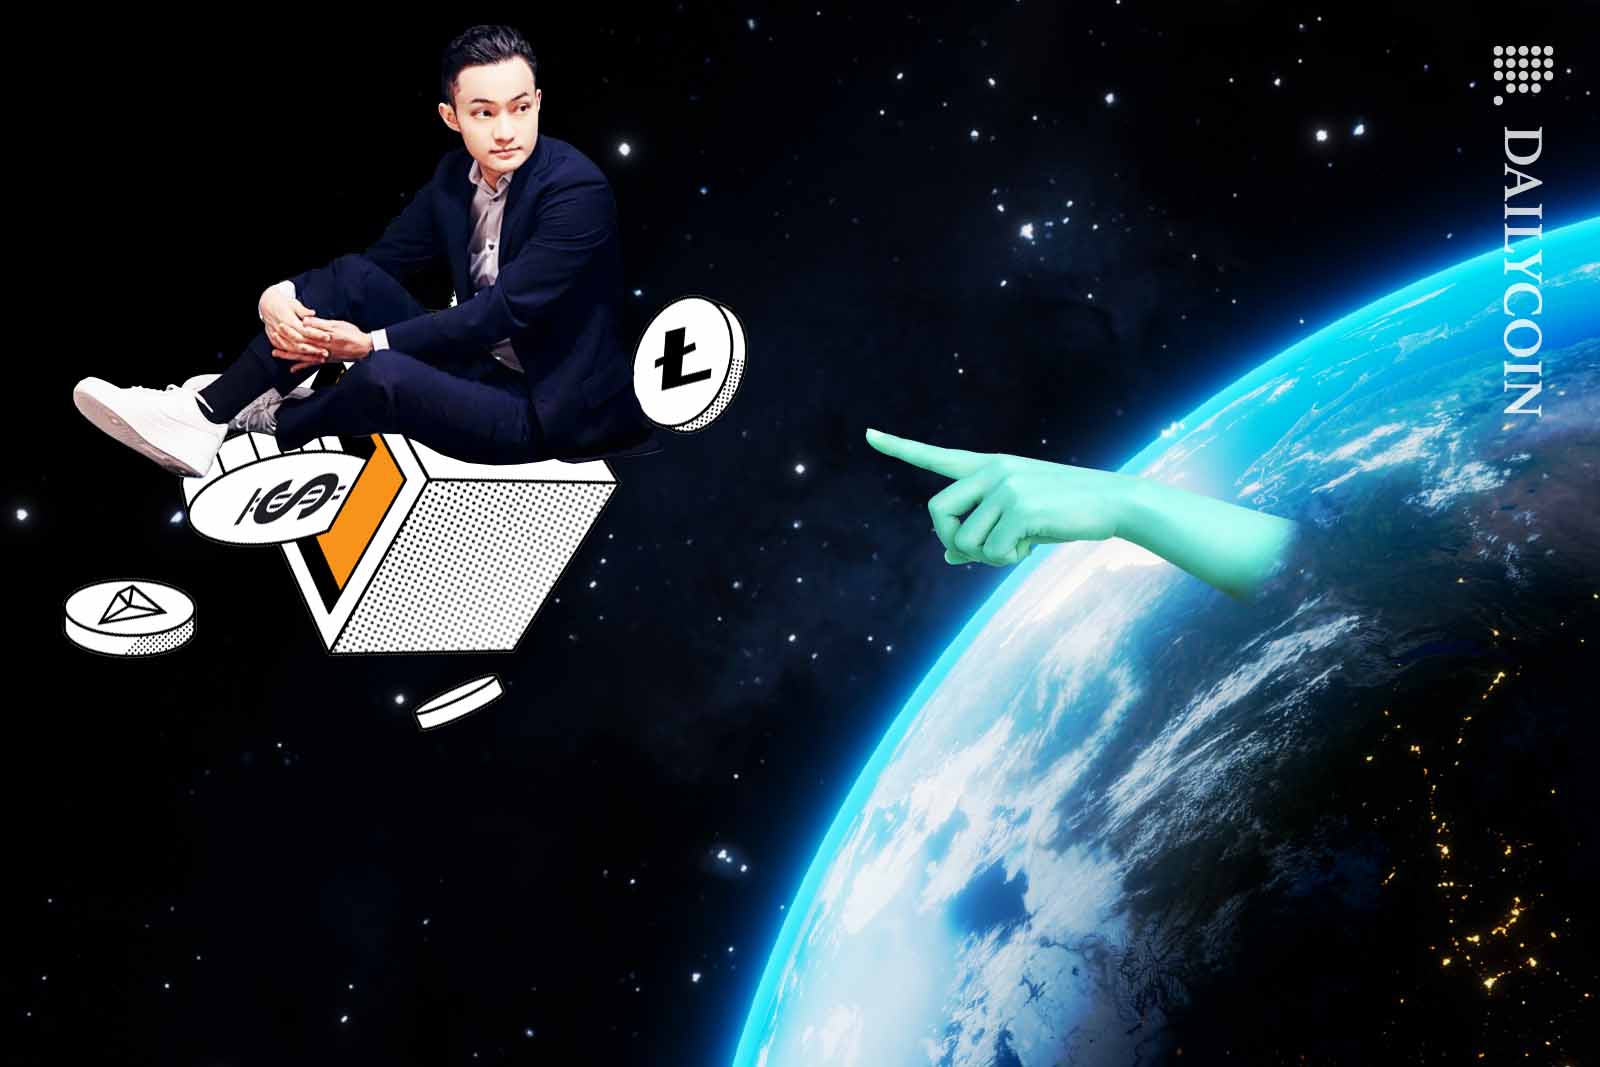 Justin Sun floating around in space on a cartoon safe, as a hand from earth pointing at him.